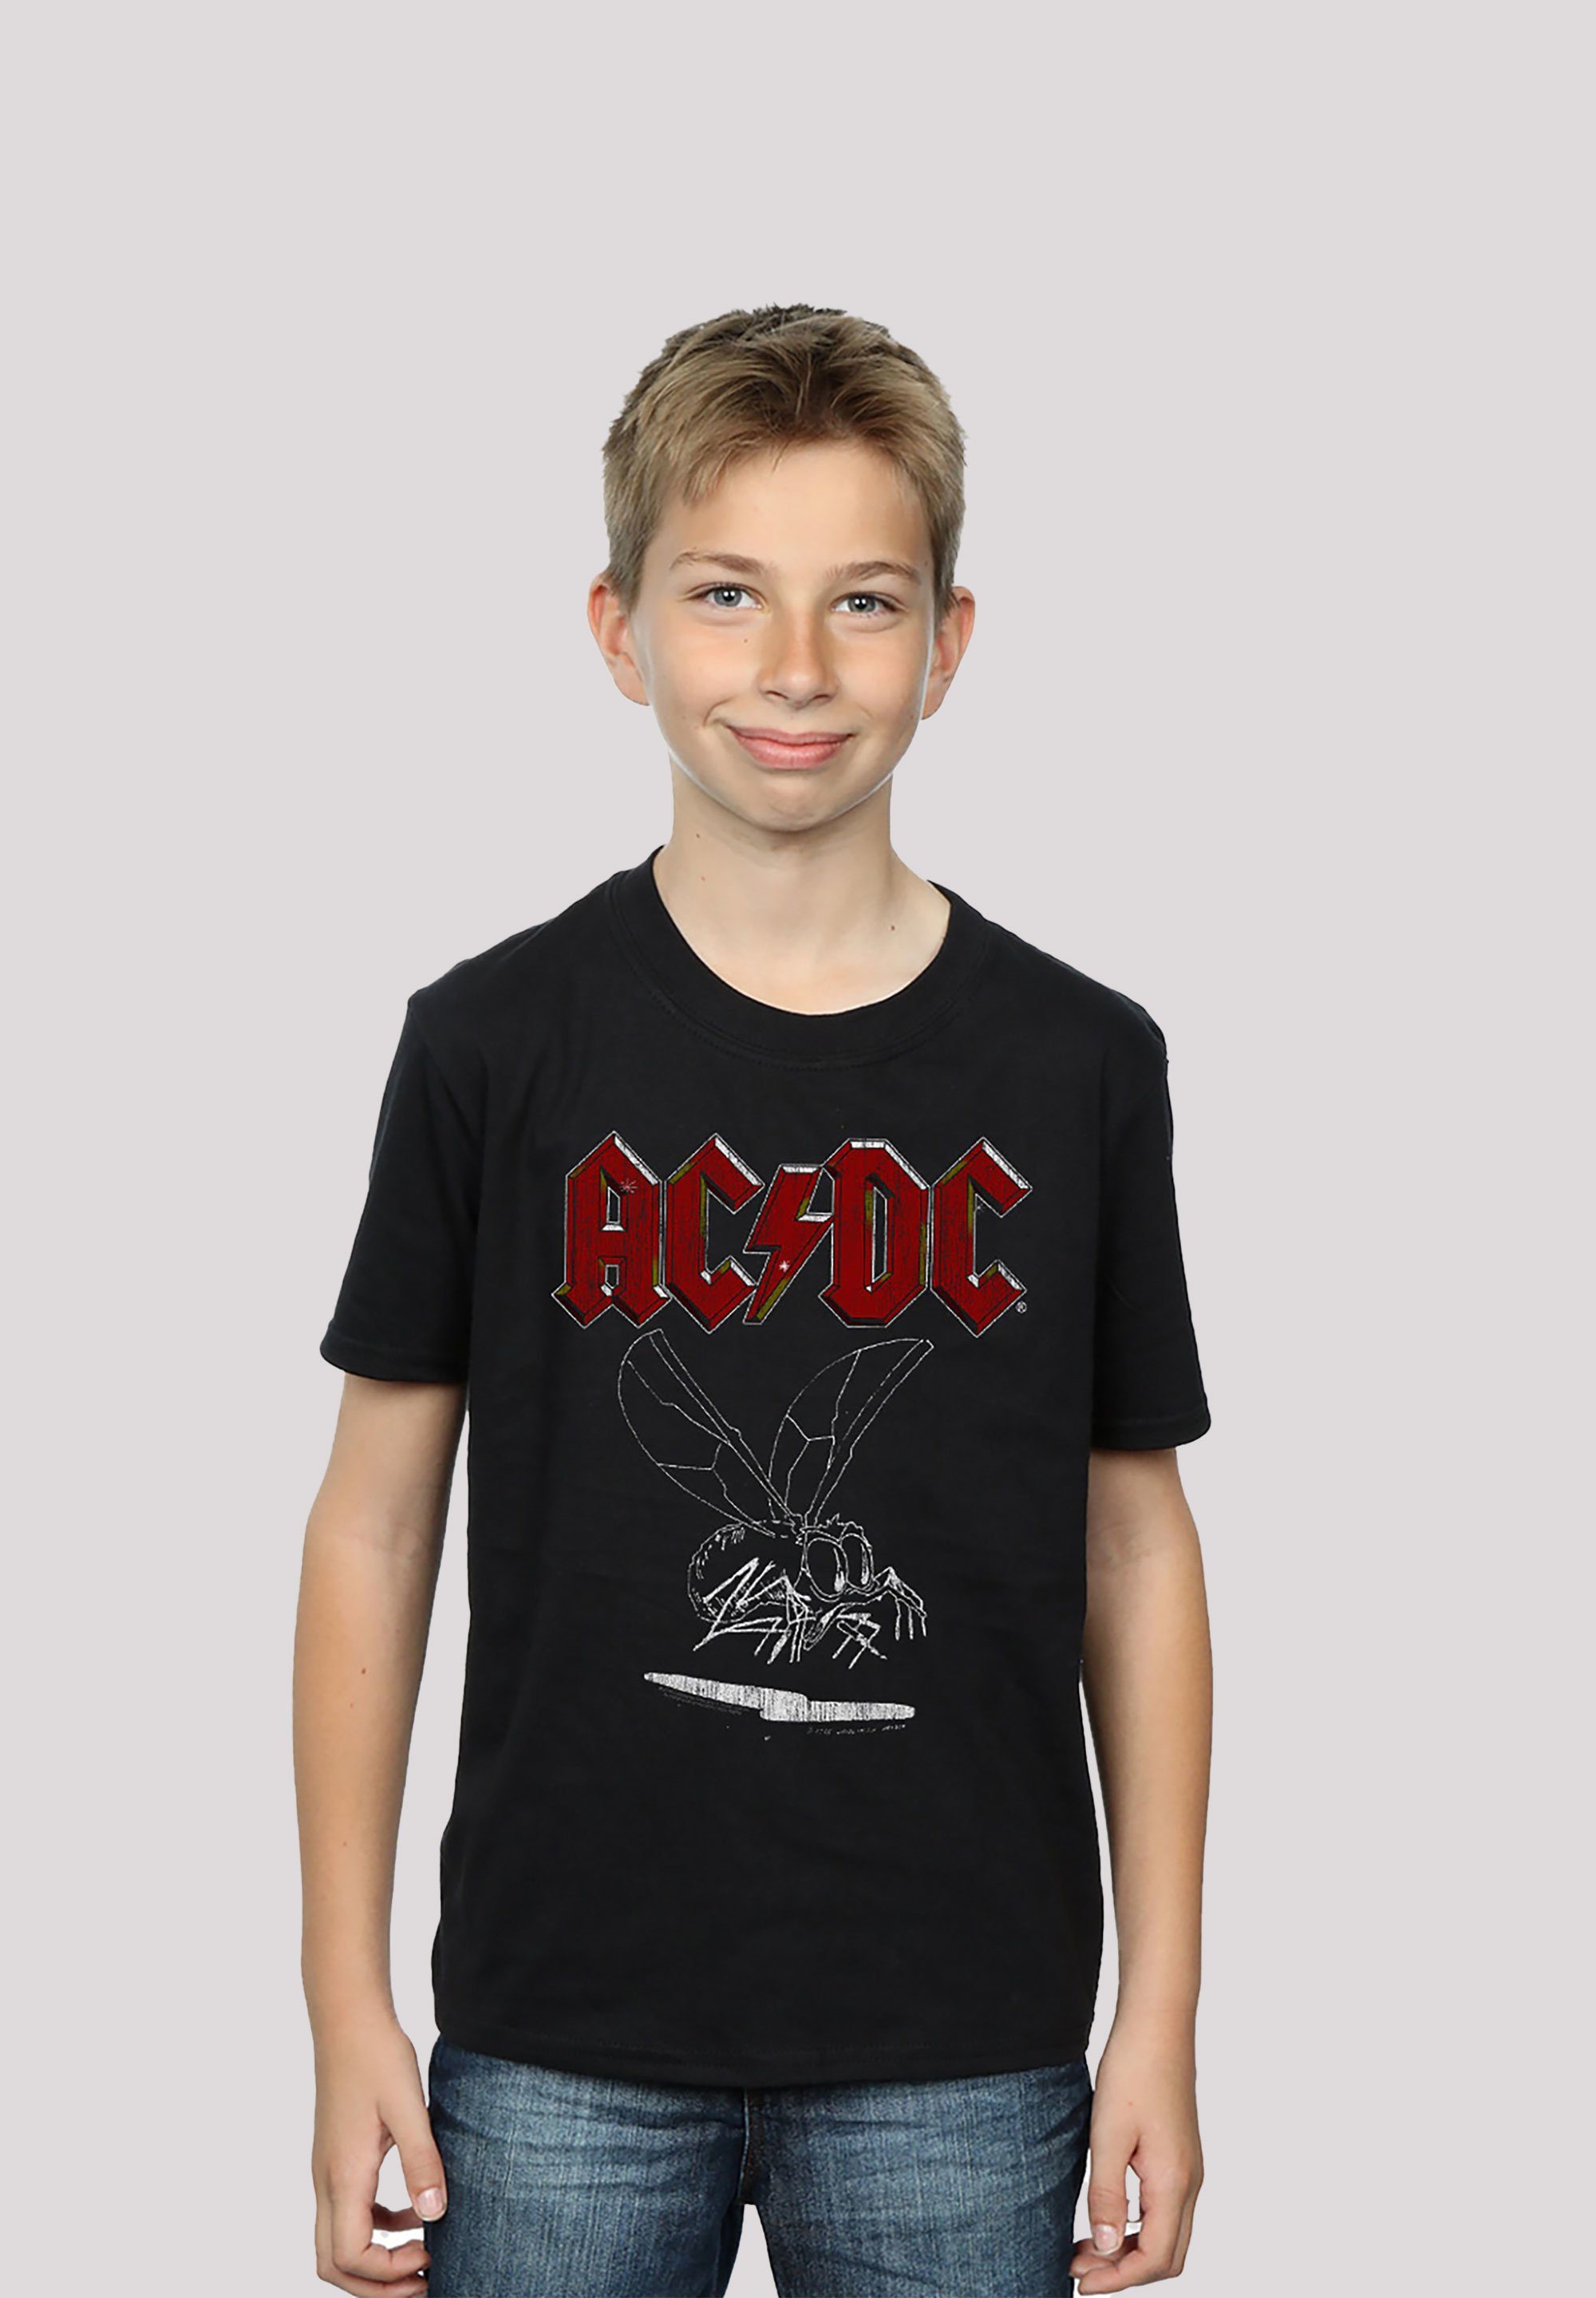 Wall für ACDC 1985 Kinder The & Herren On Fly T-Shirt Print F4NT4STIC